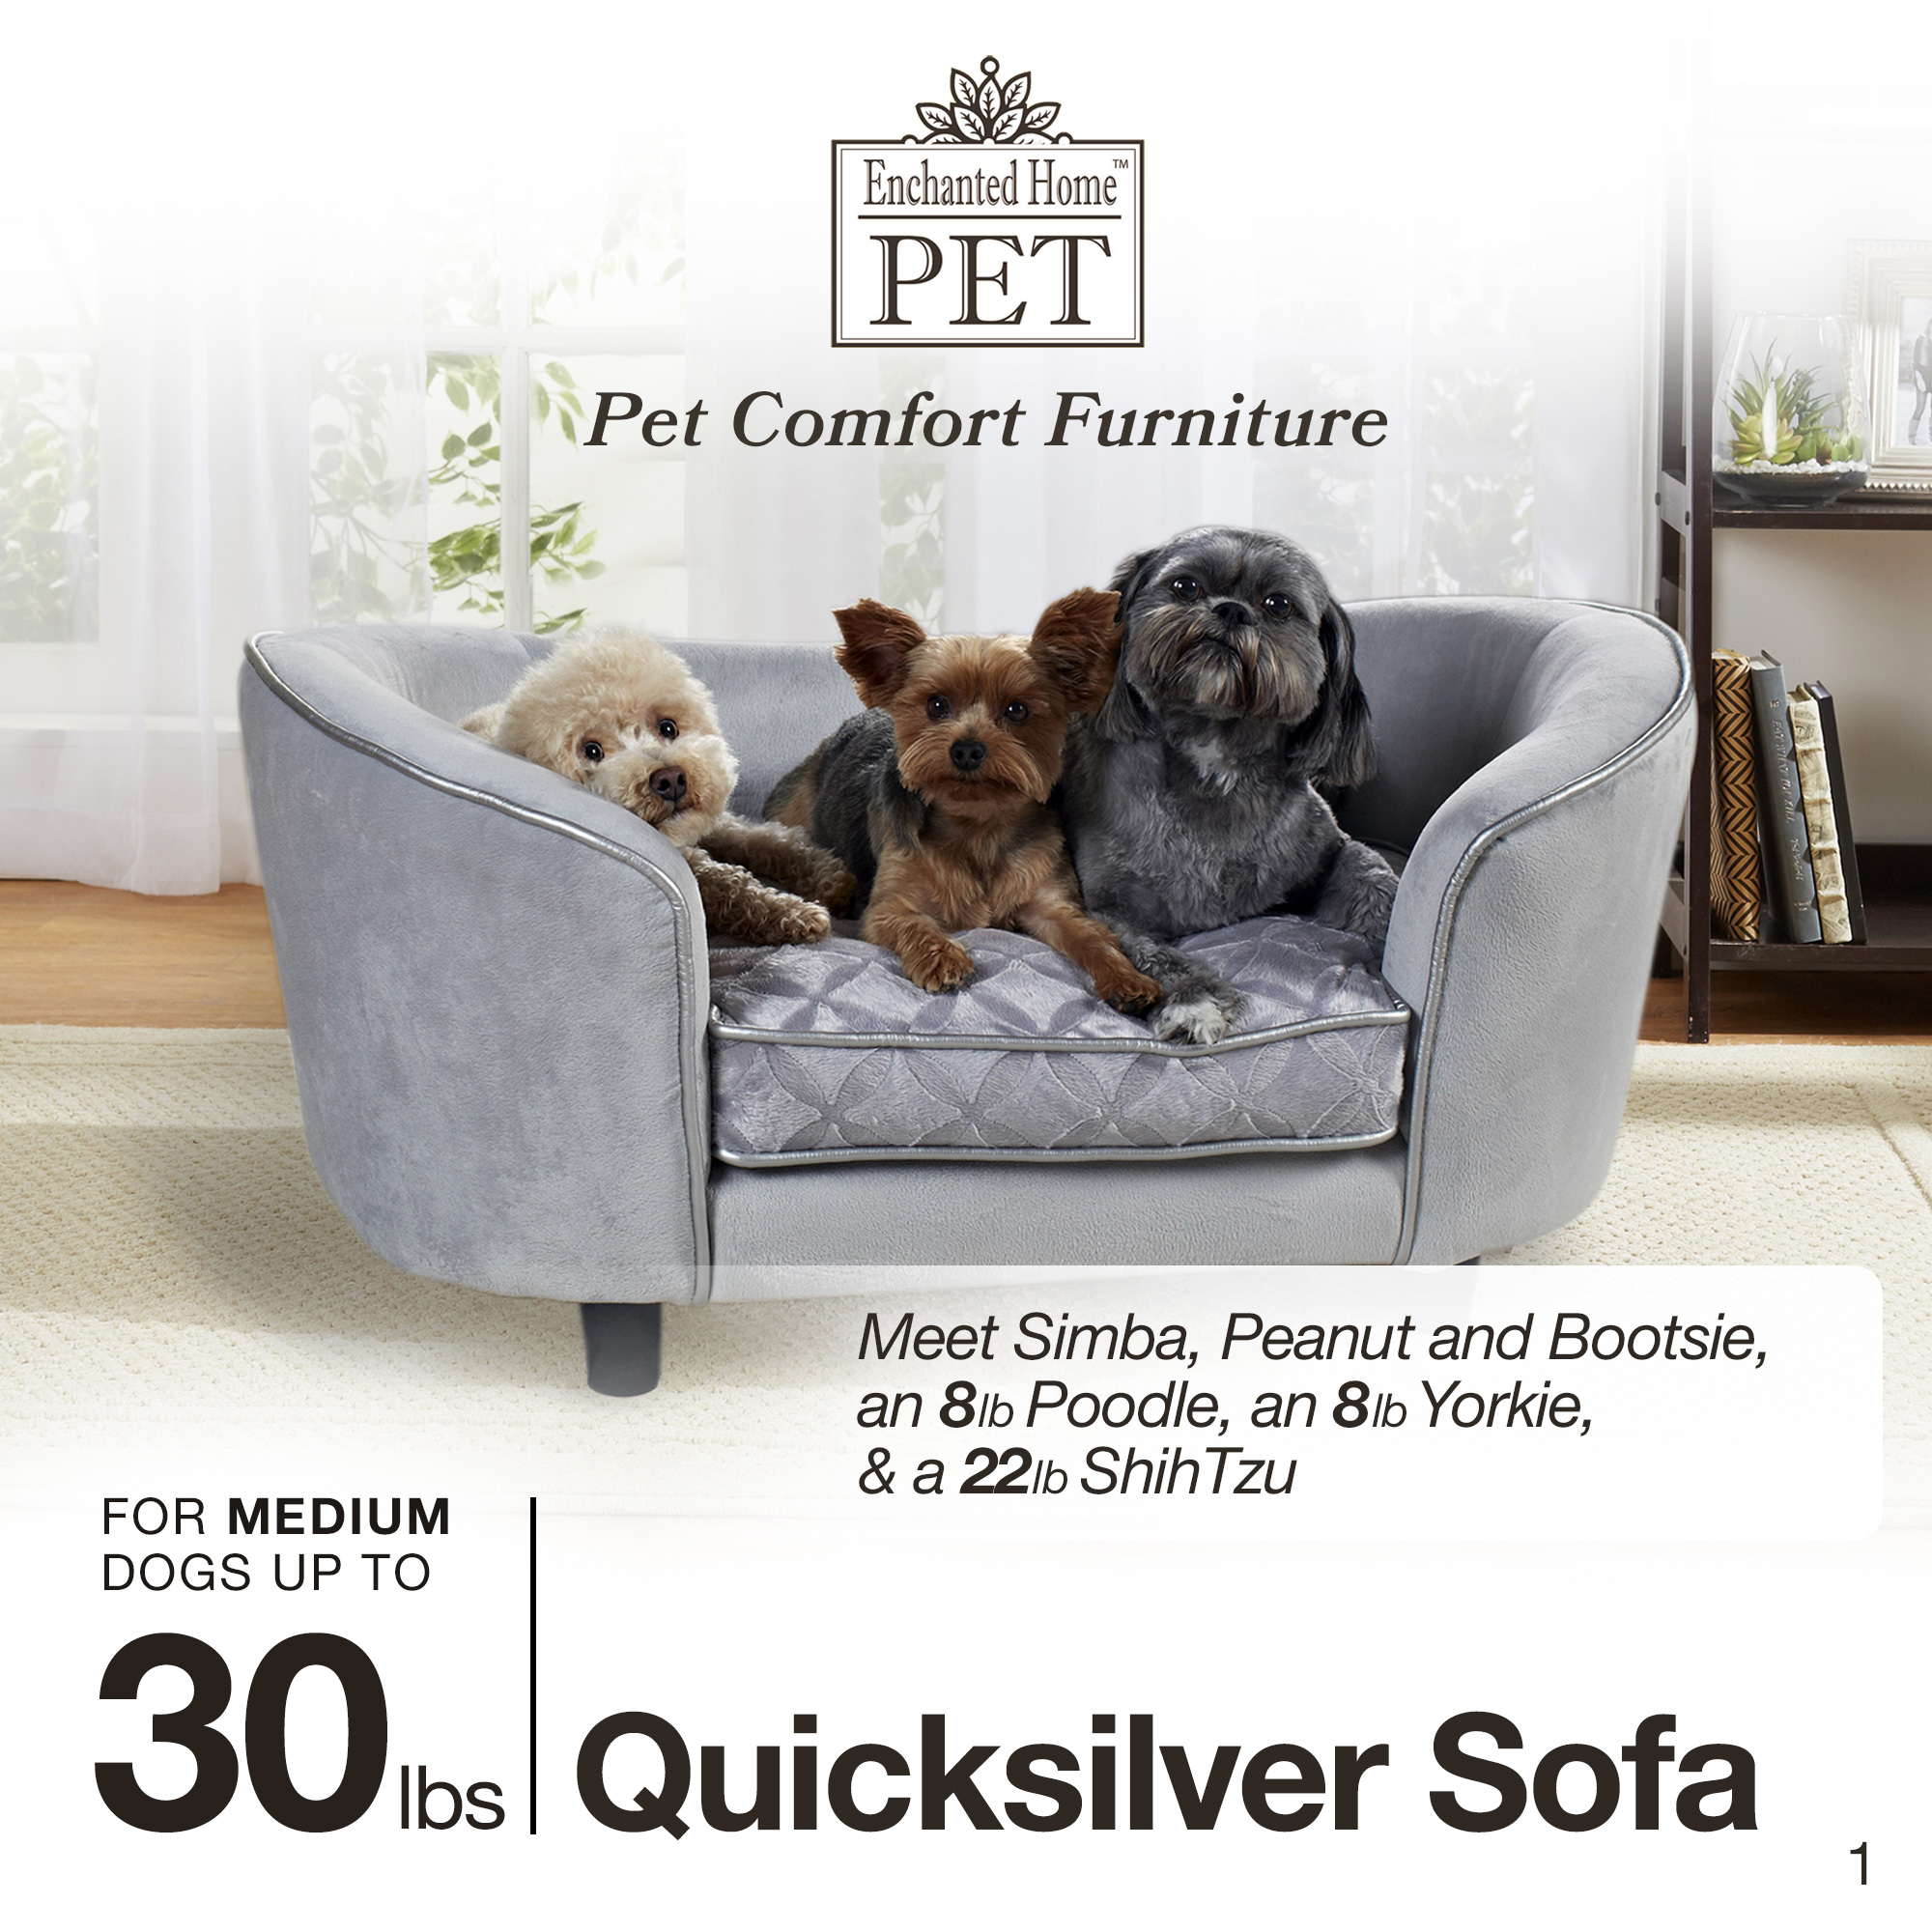 Enchanted Home Pet - Ultra Plush Large Snuggle Bed - Quicksilver